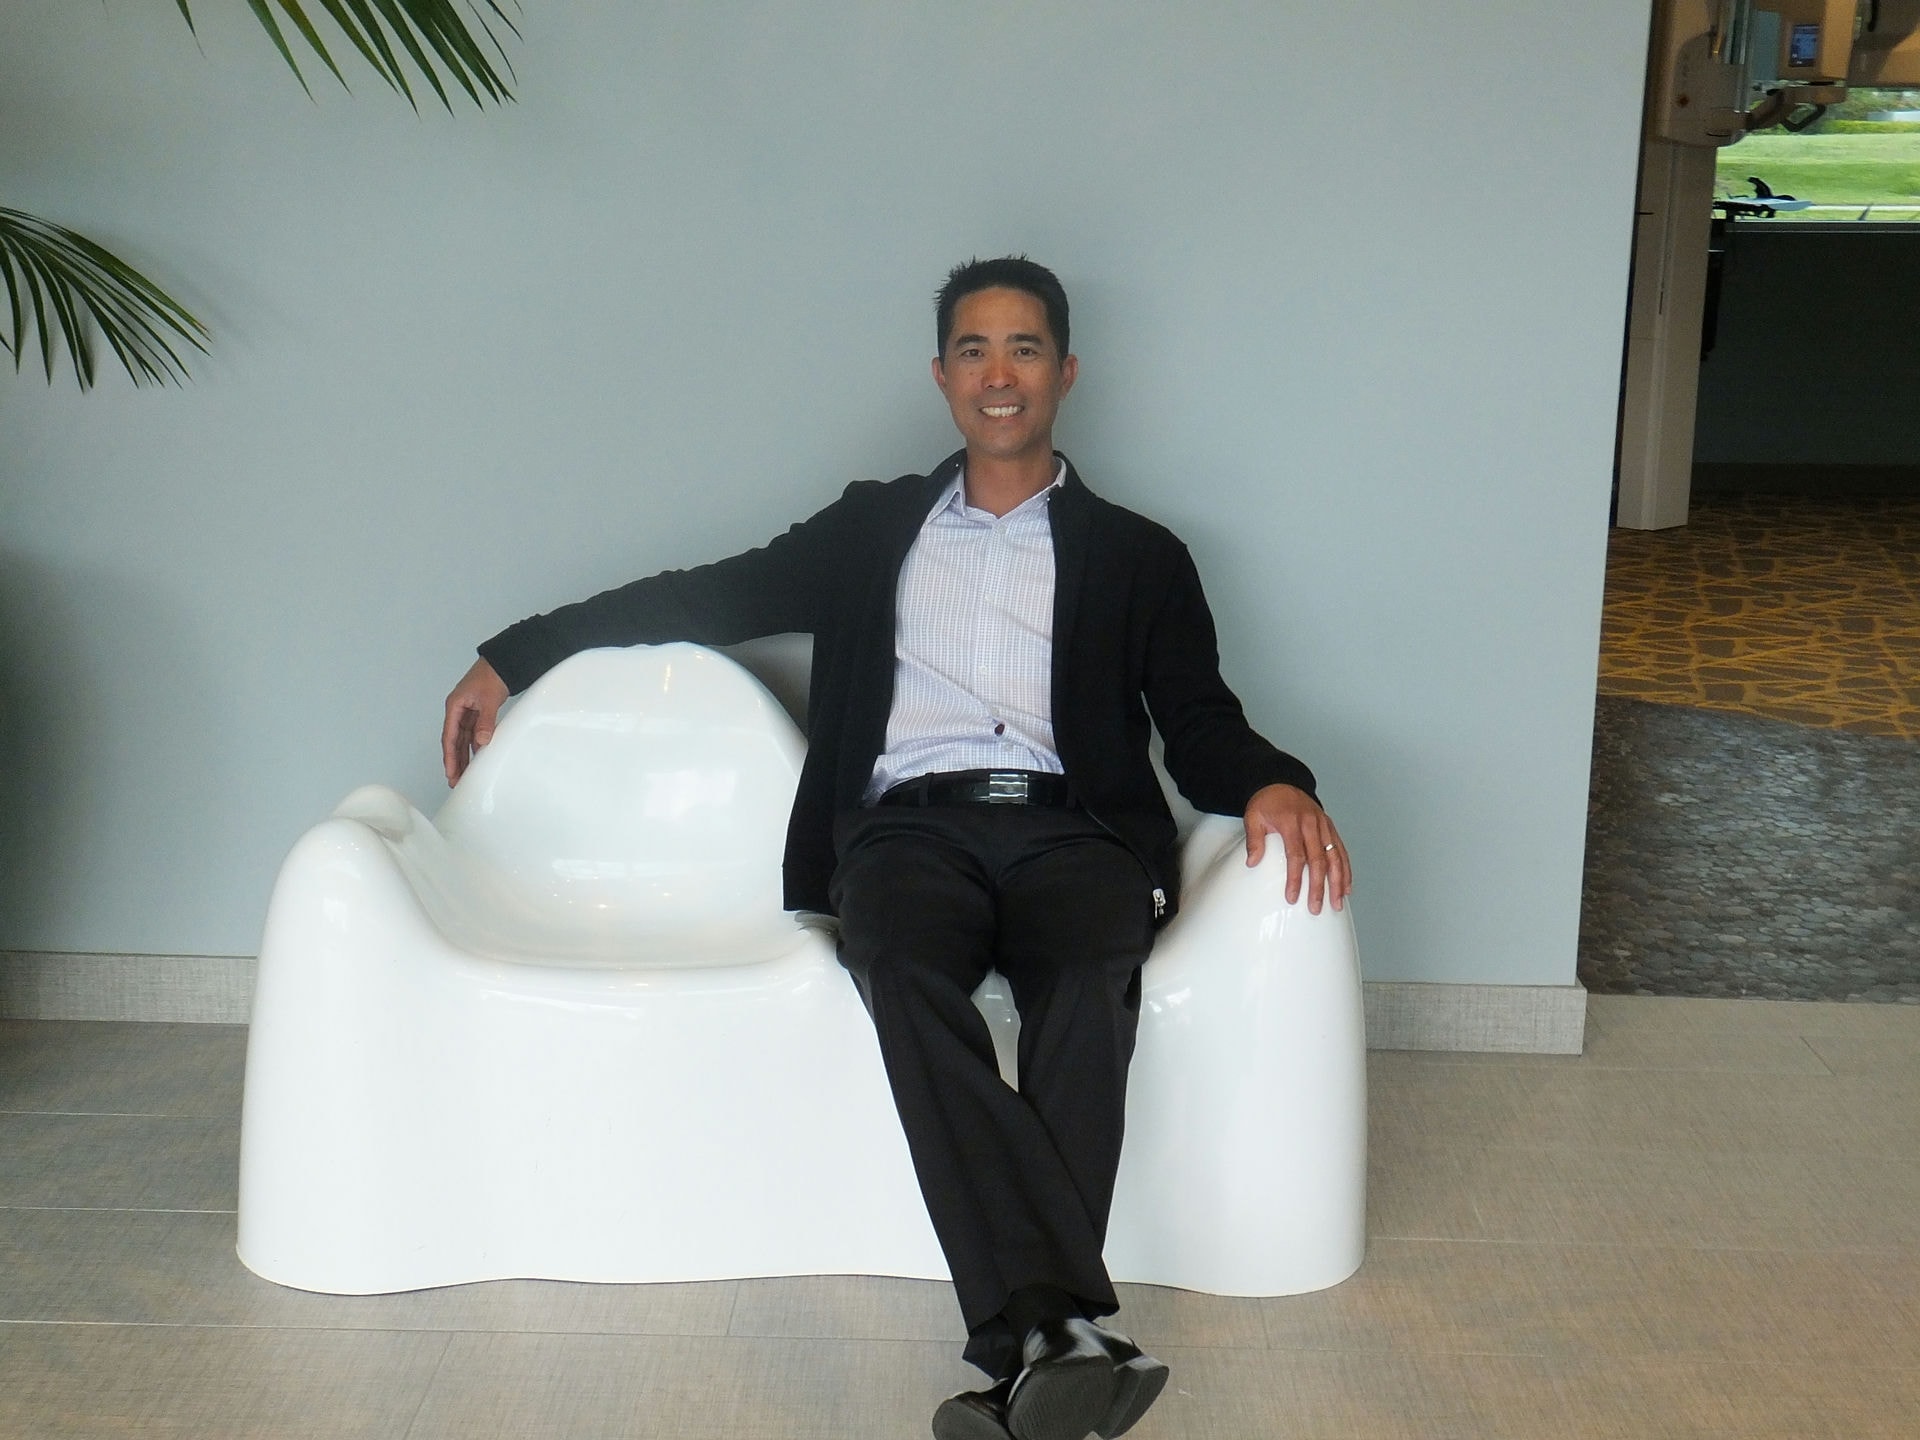 Benco Dental Territory Representative Lan Phi at one with CenterPoint West's molar-inspired chair.